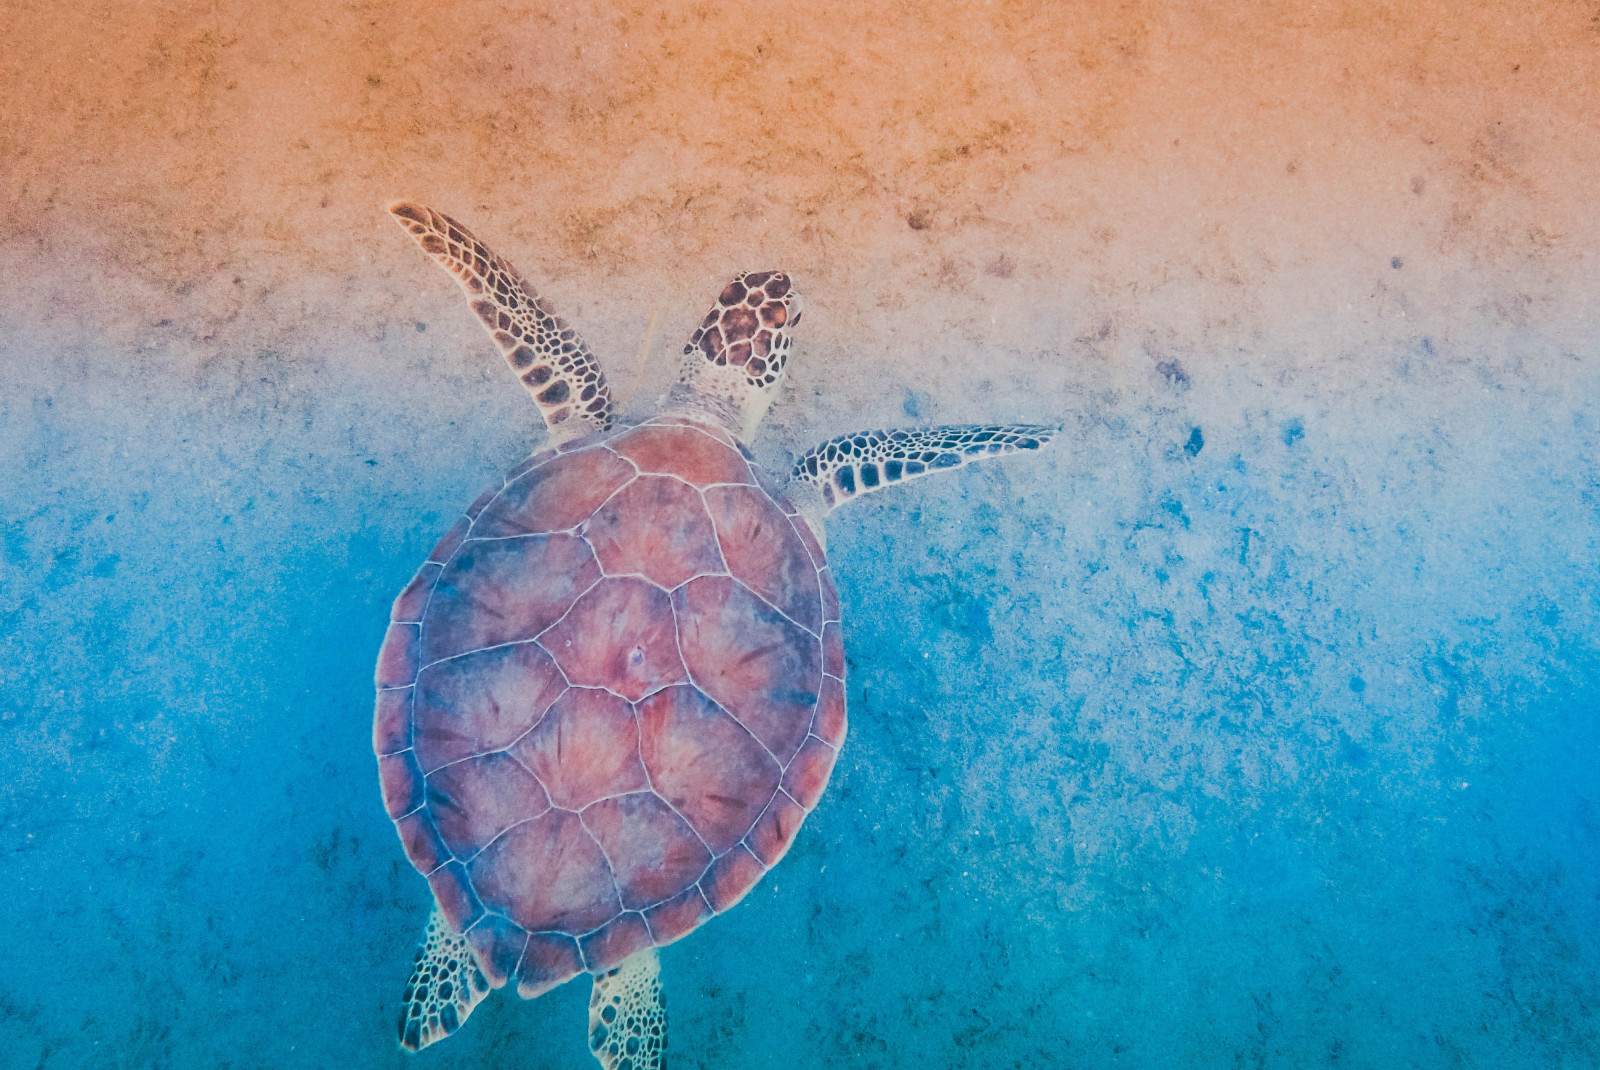 Turtle with red shell swims in blue waters along red sand beach